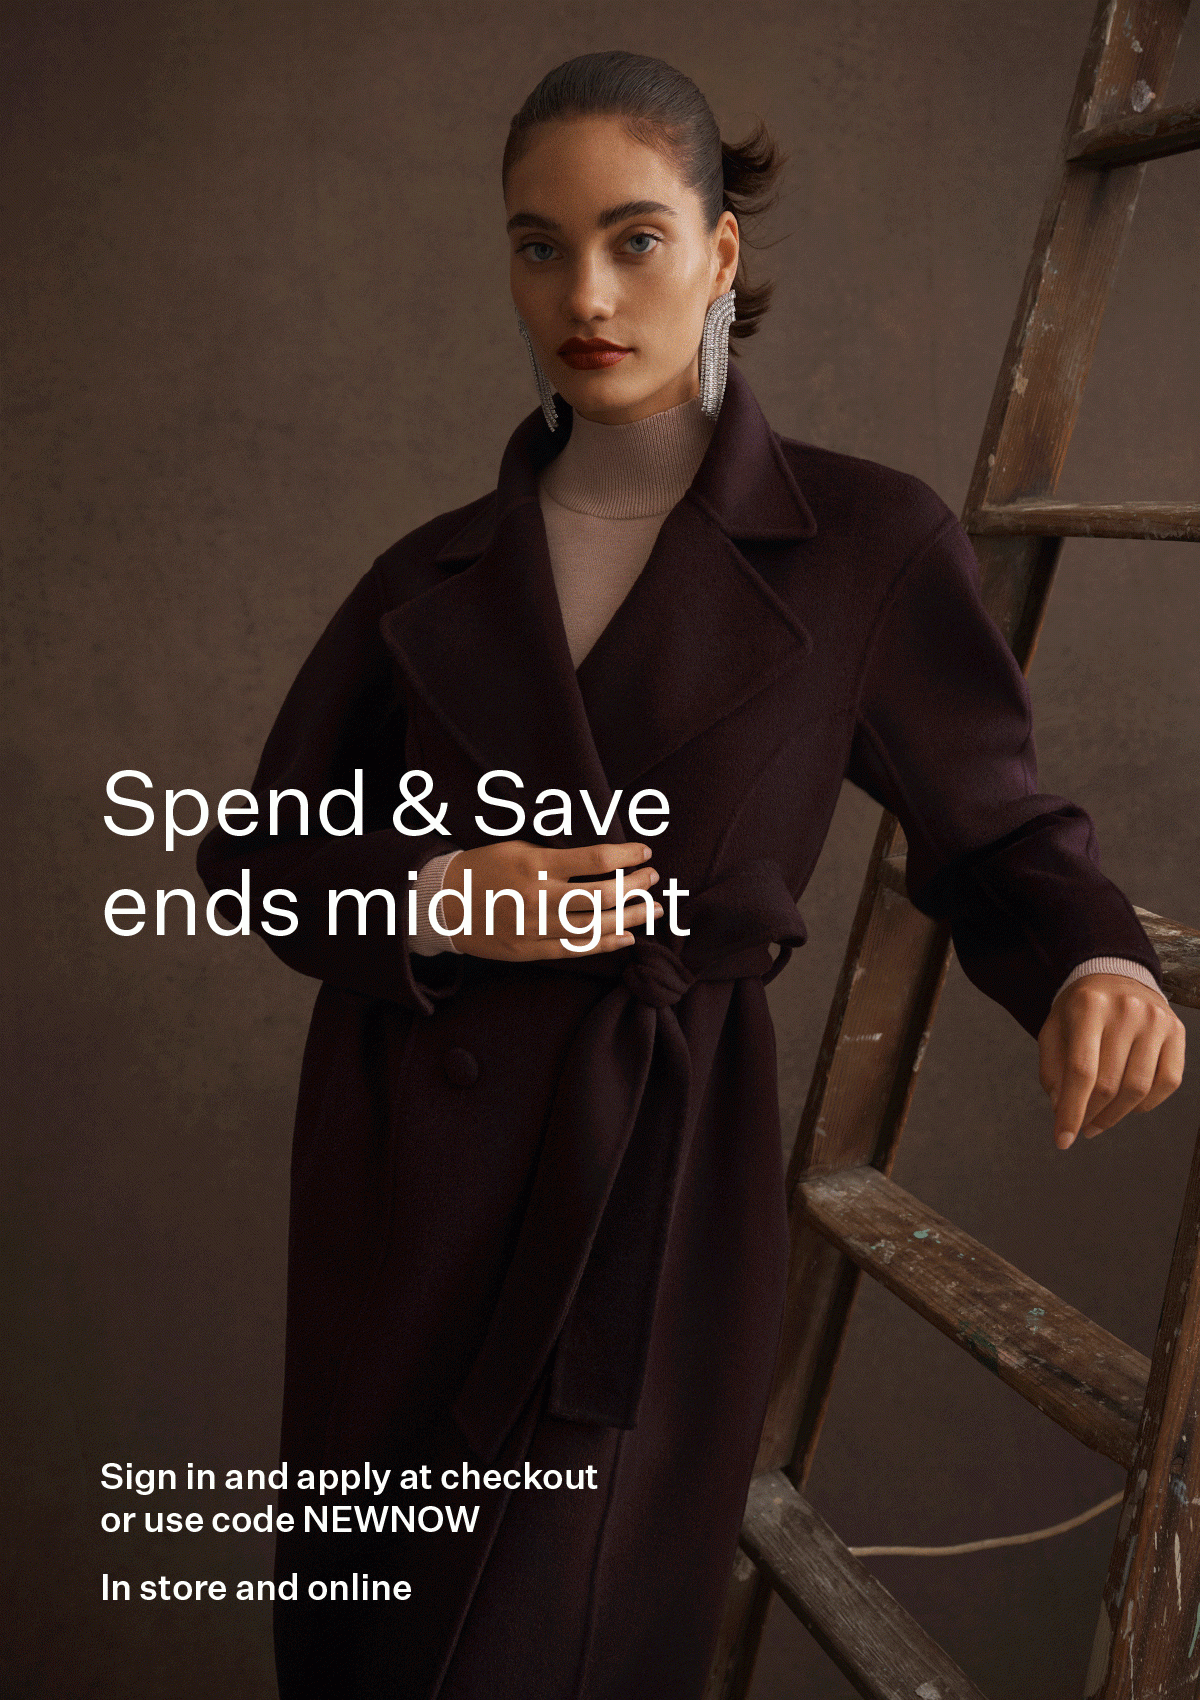 Spend & Save ends midnight